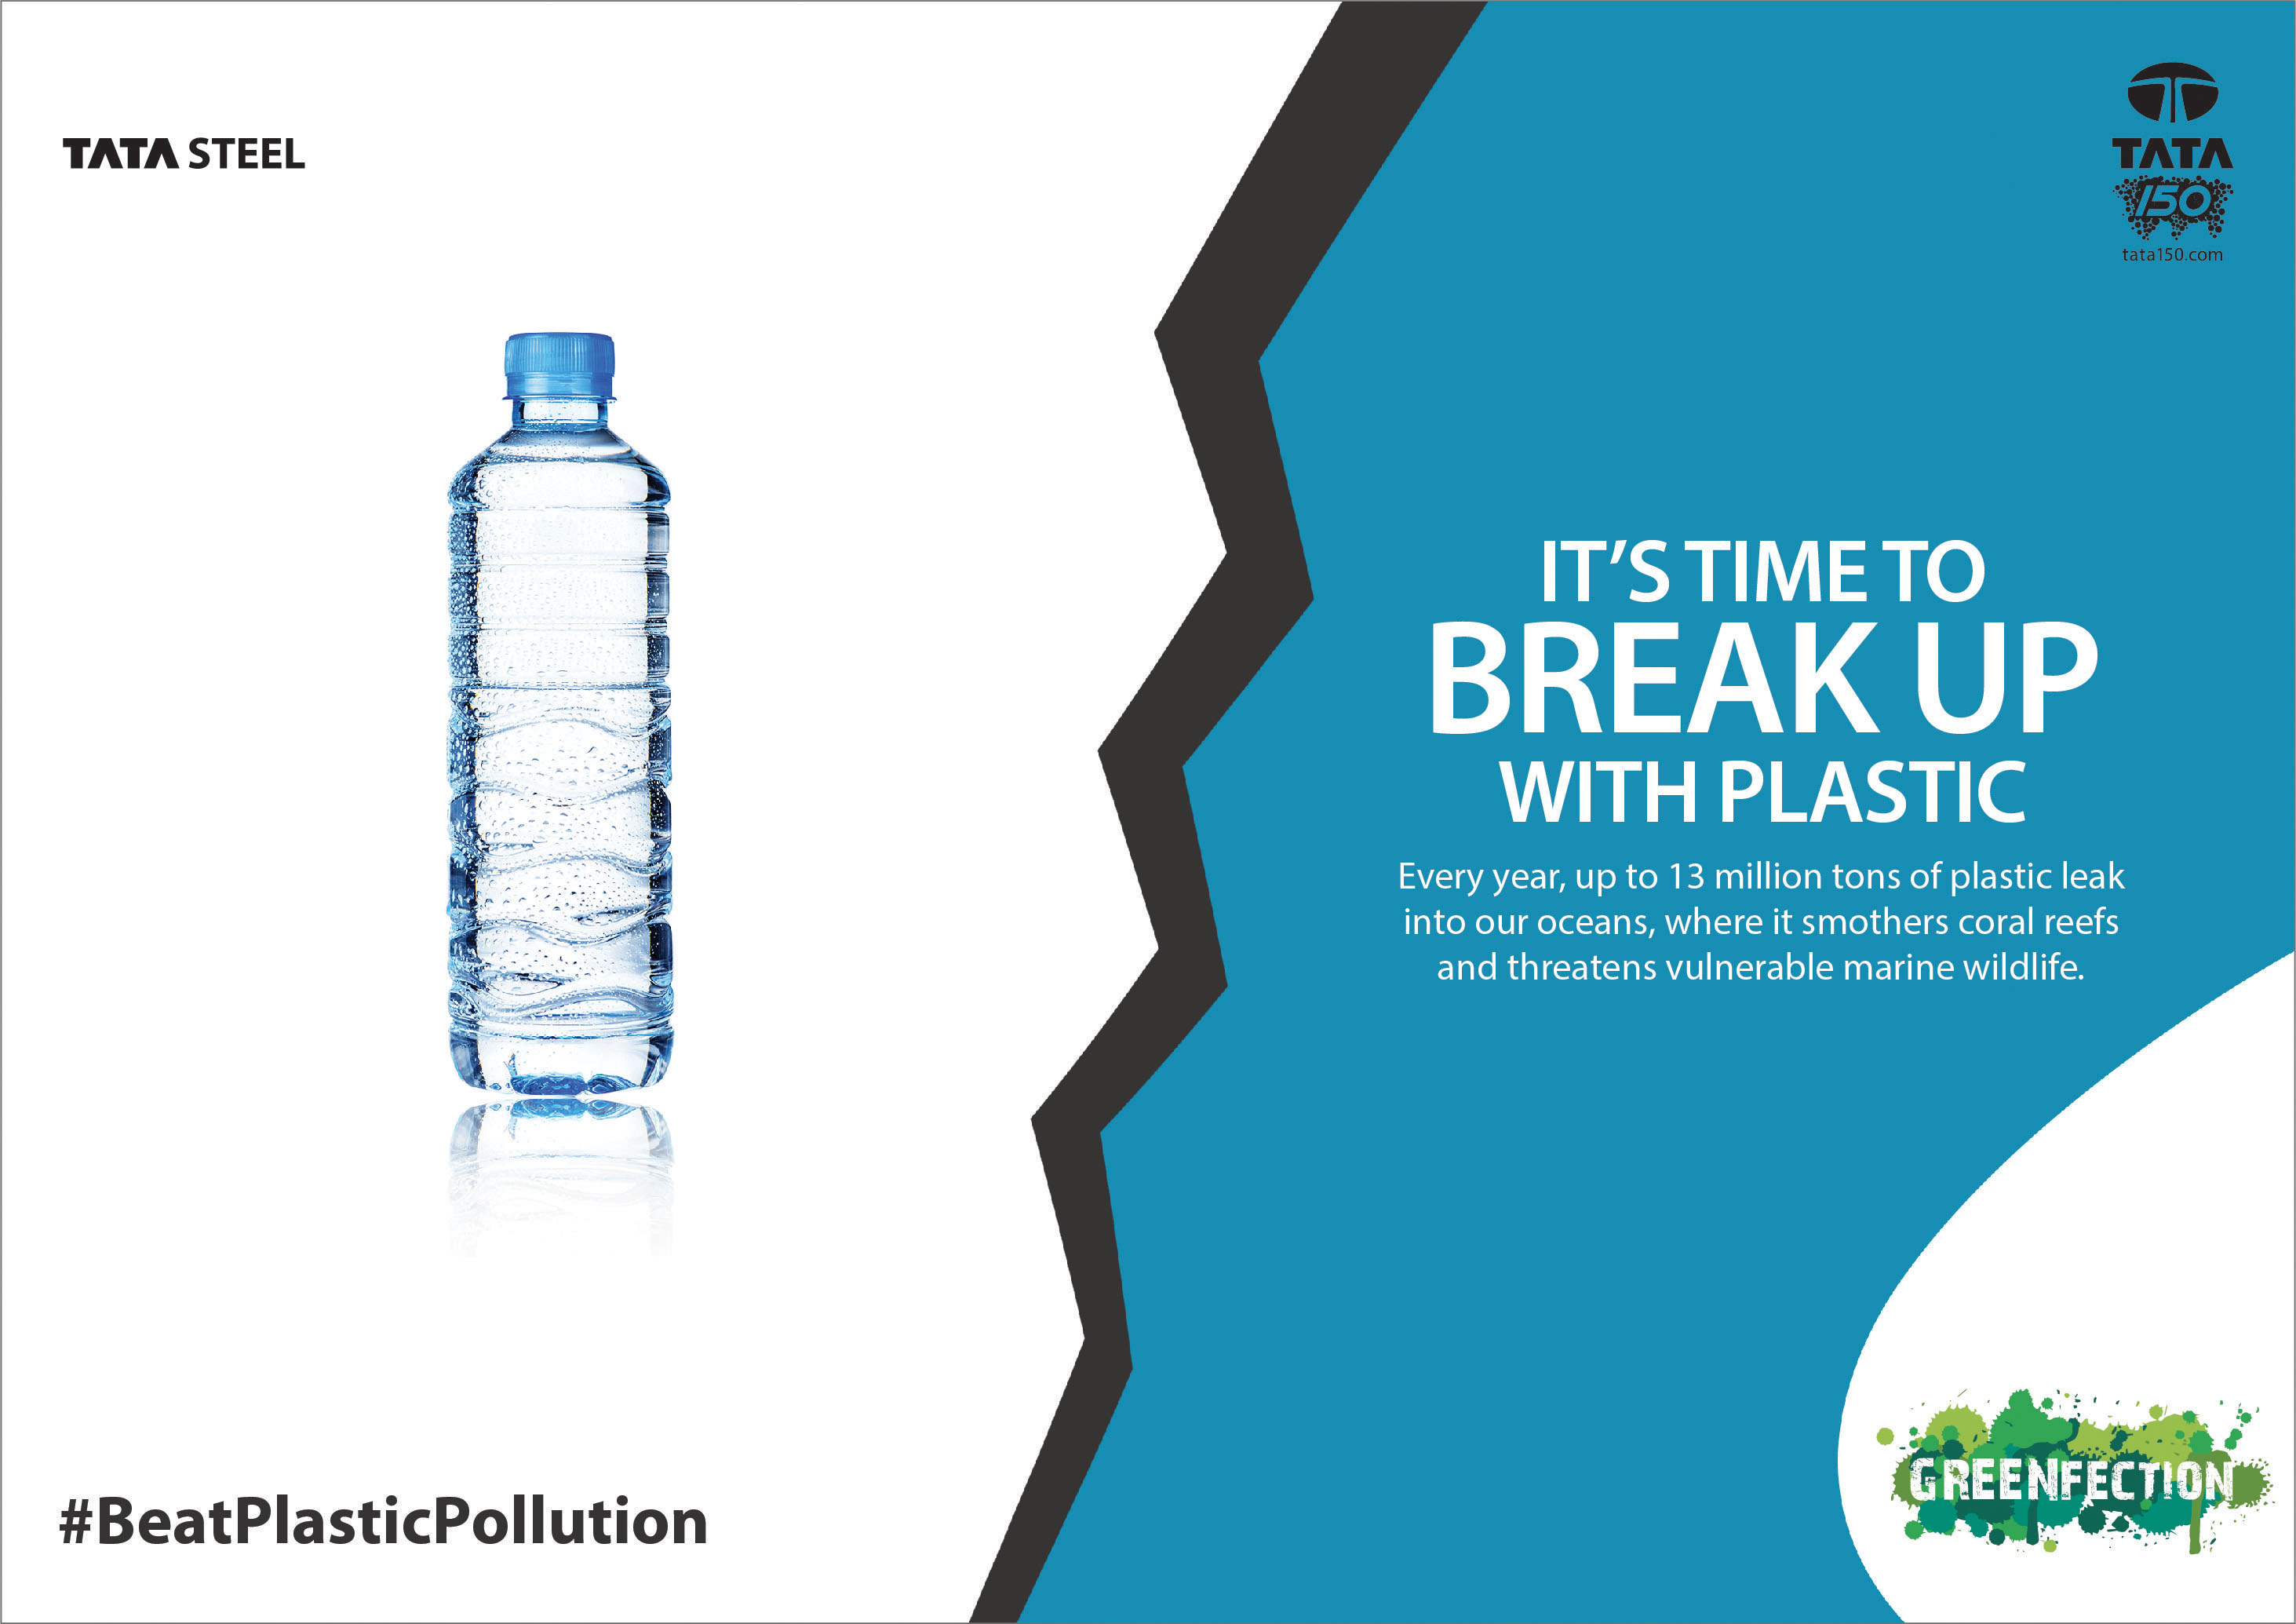 Its time to break up with plastic